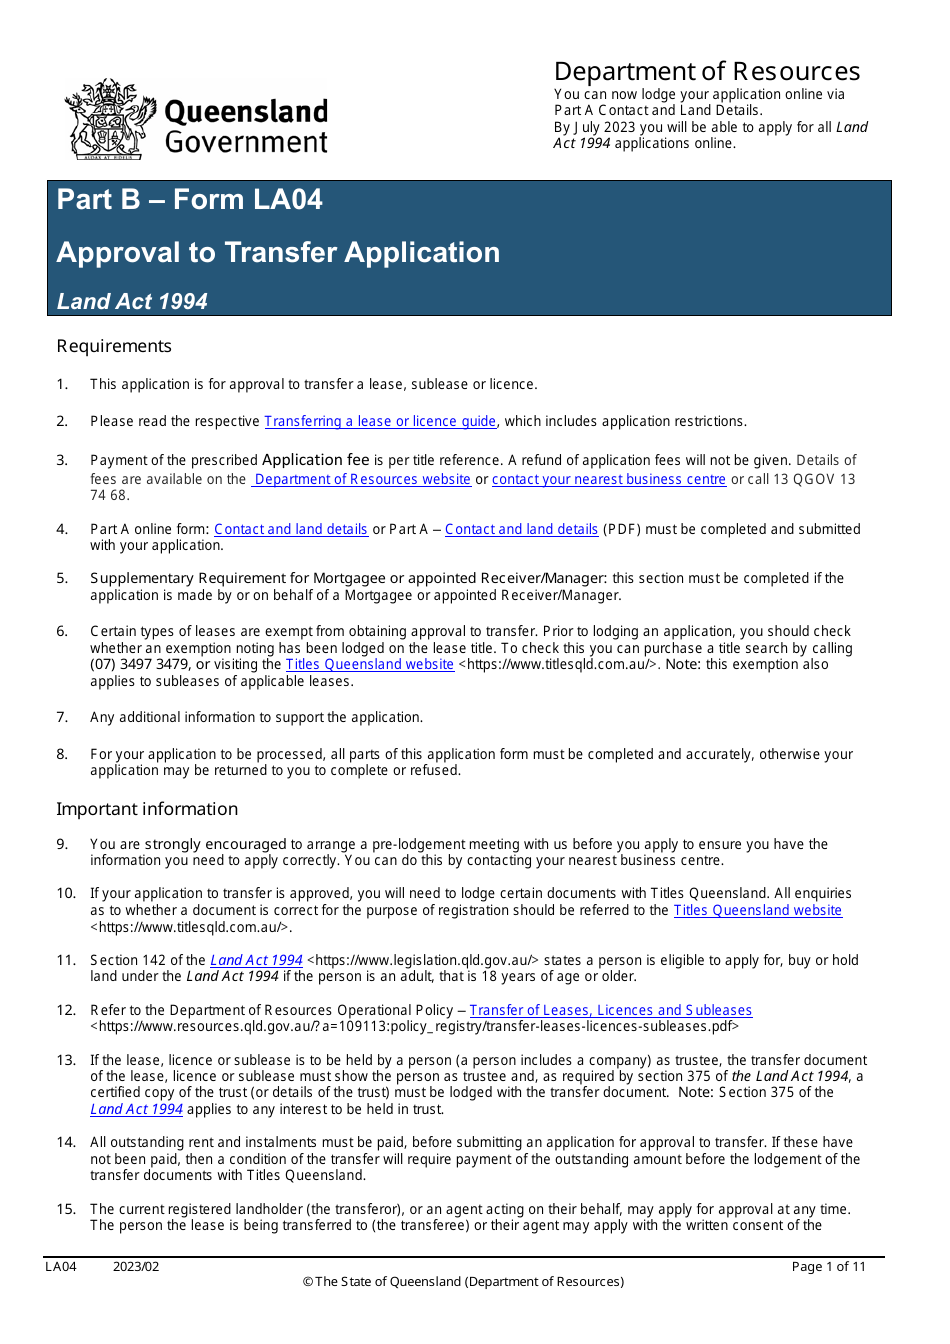 Form LA04 Part B Approval to Transfer Application - Queensland, Australia, Page 1